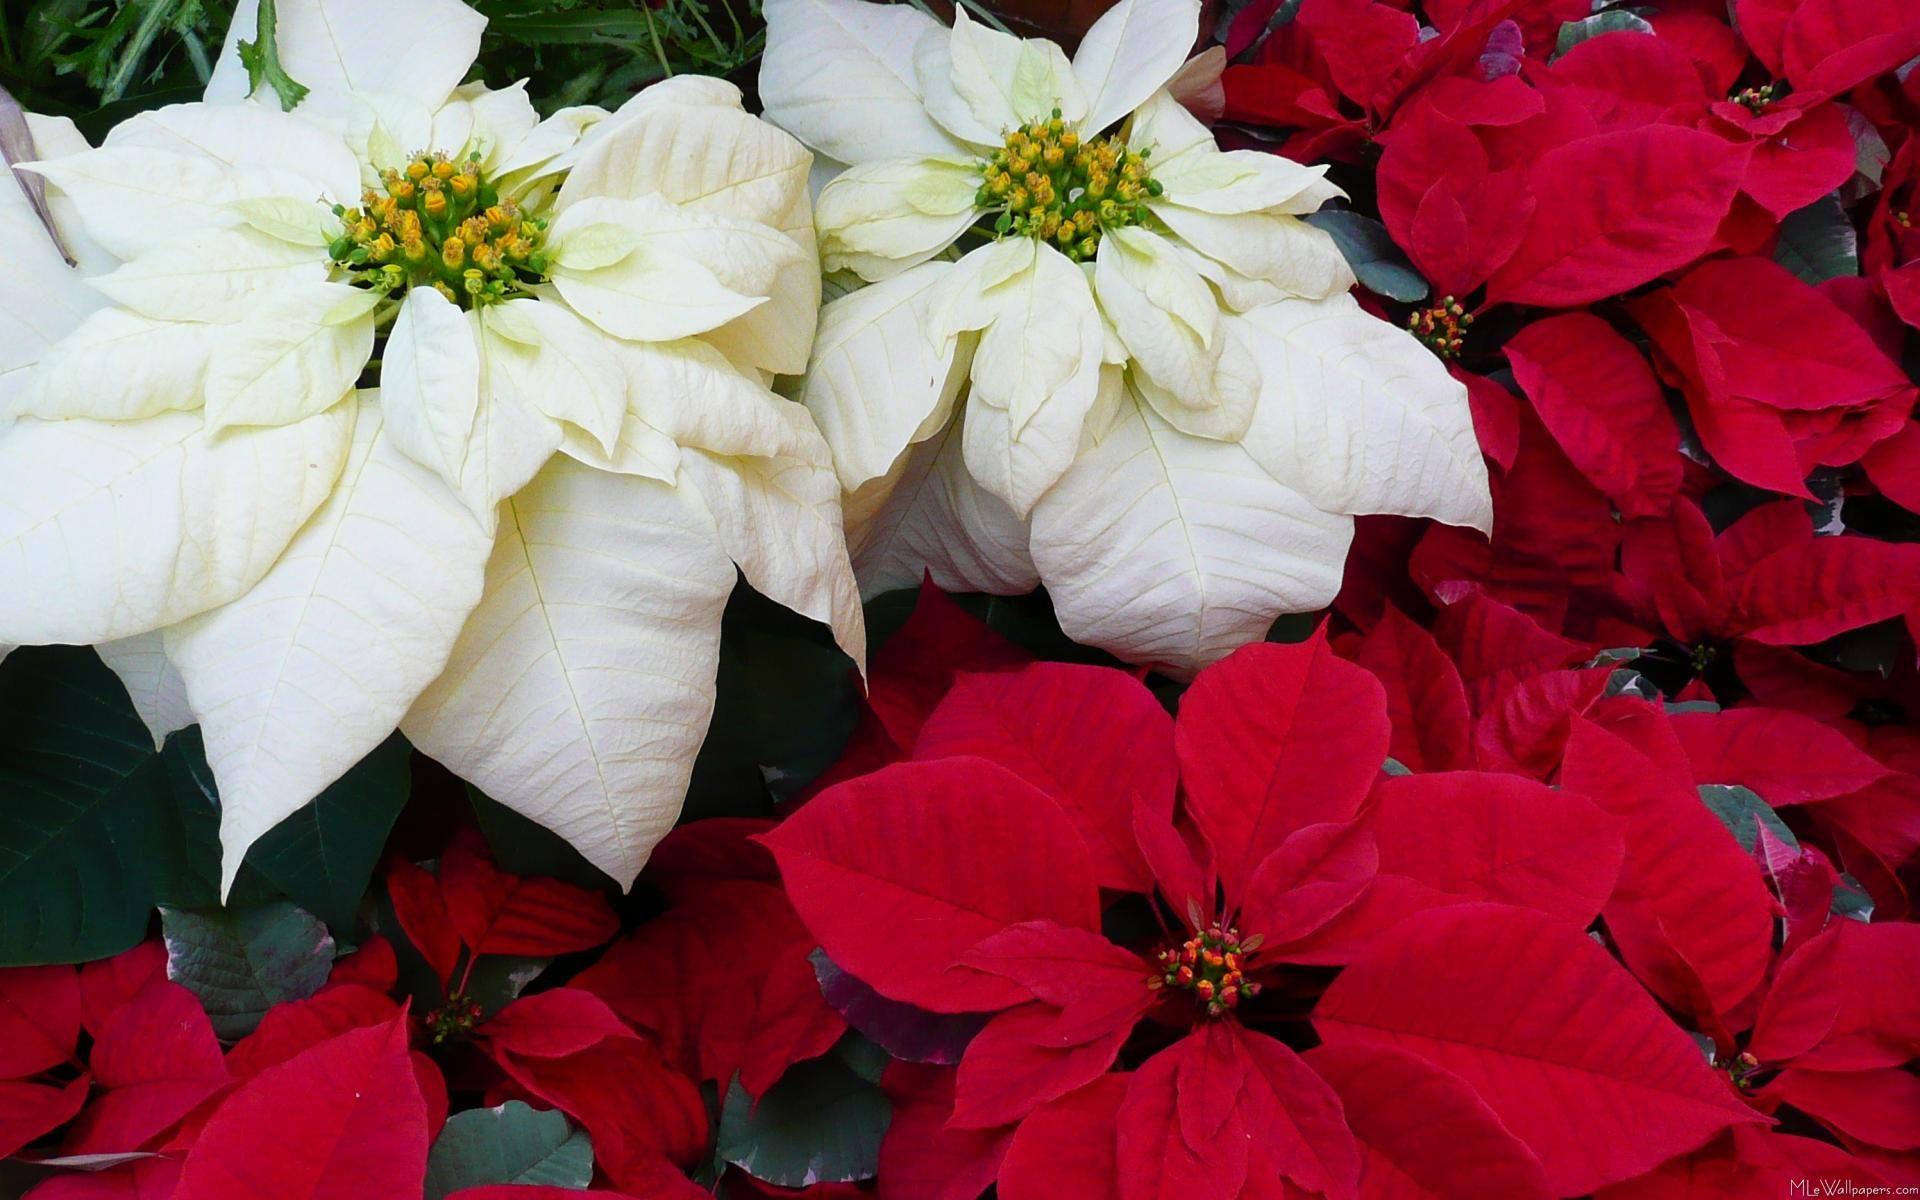 Traditional red and white poinsettias. Not your average